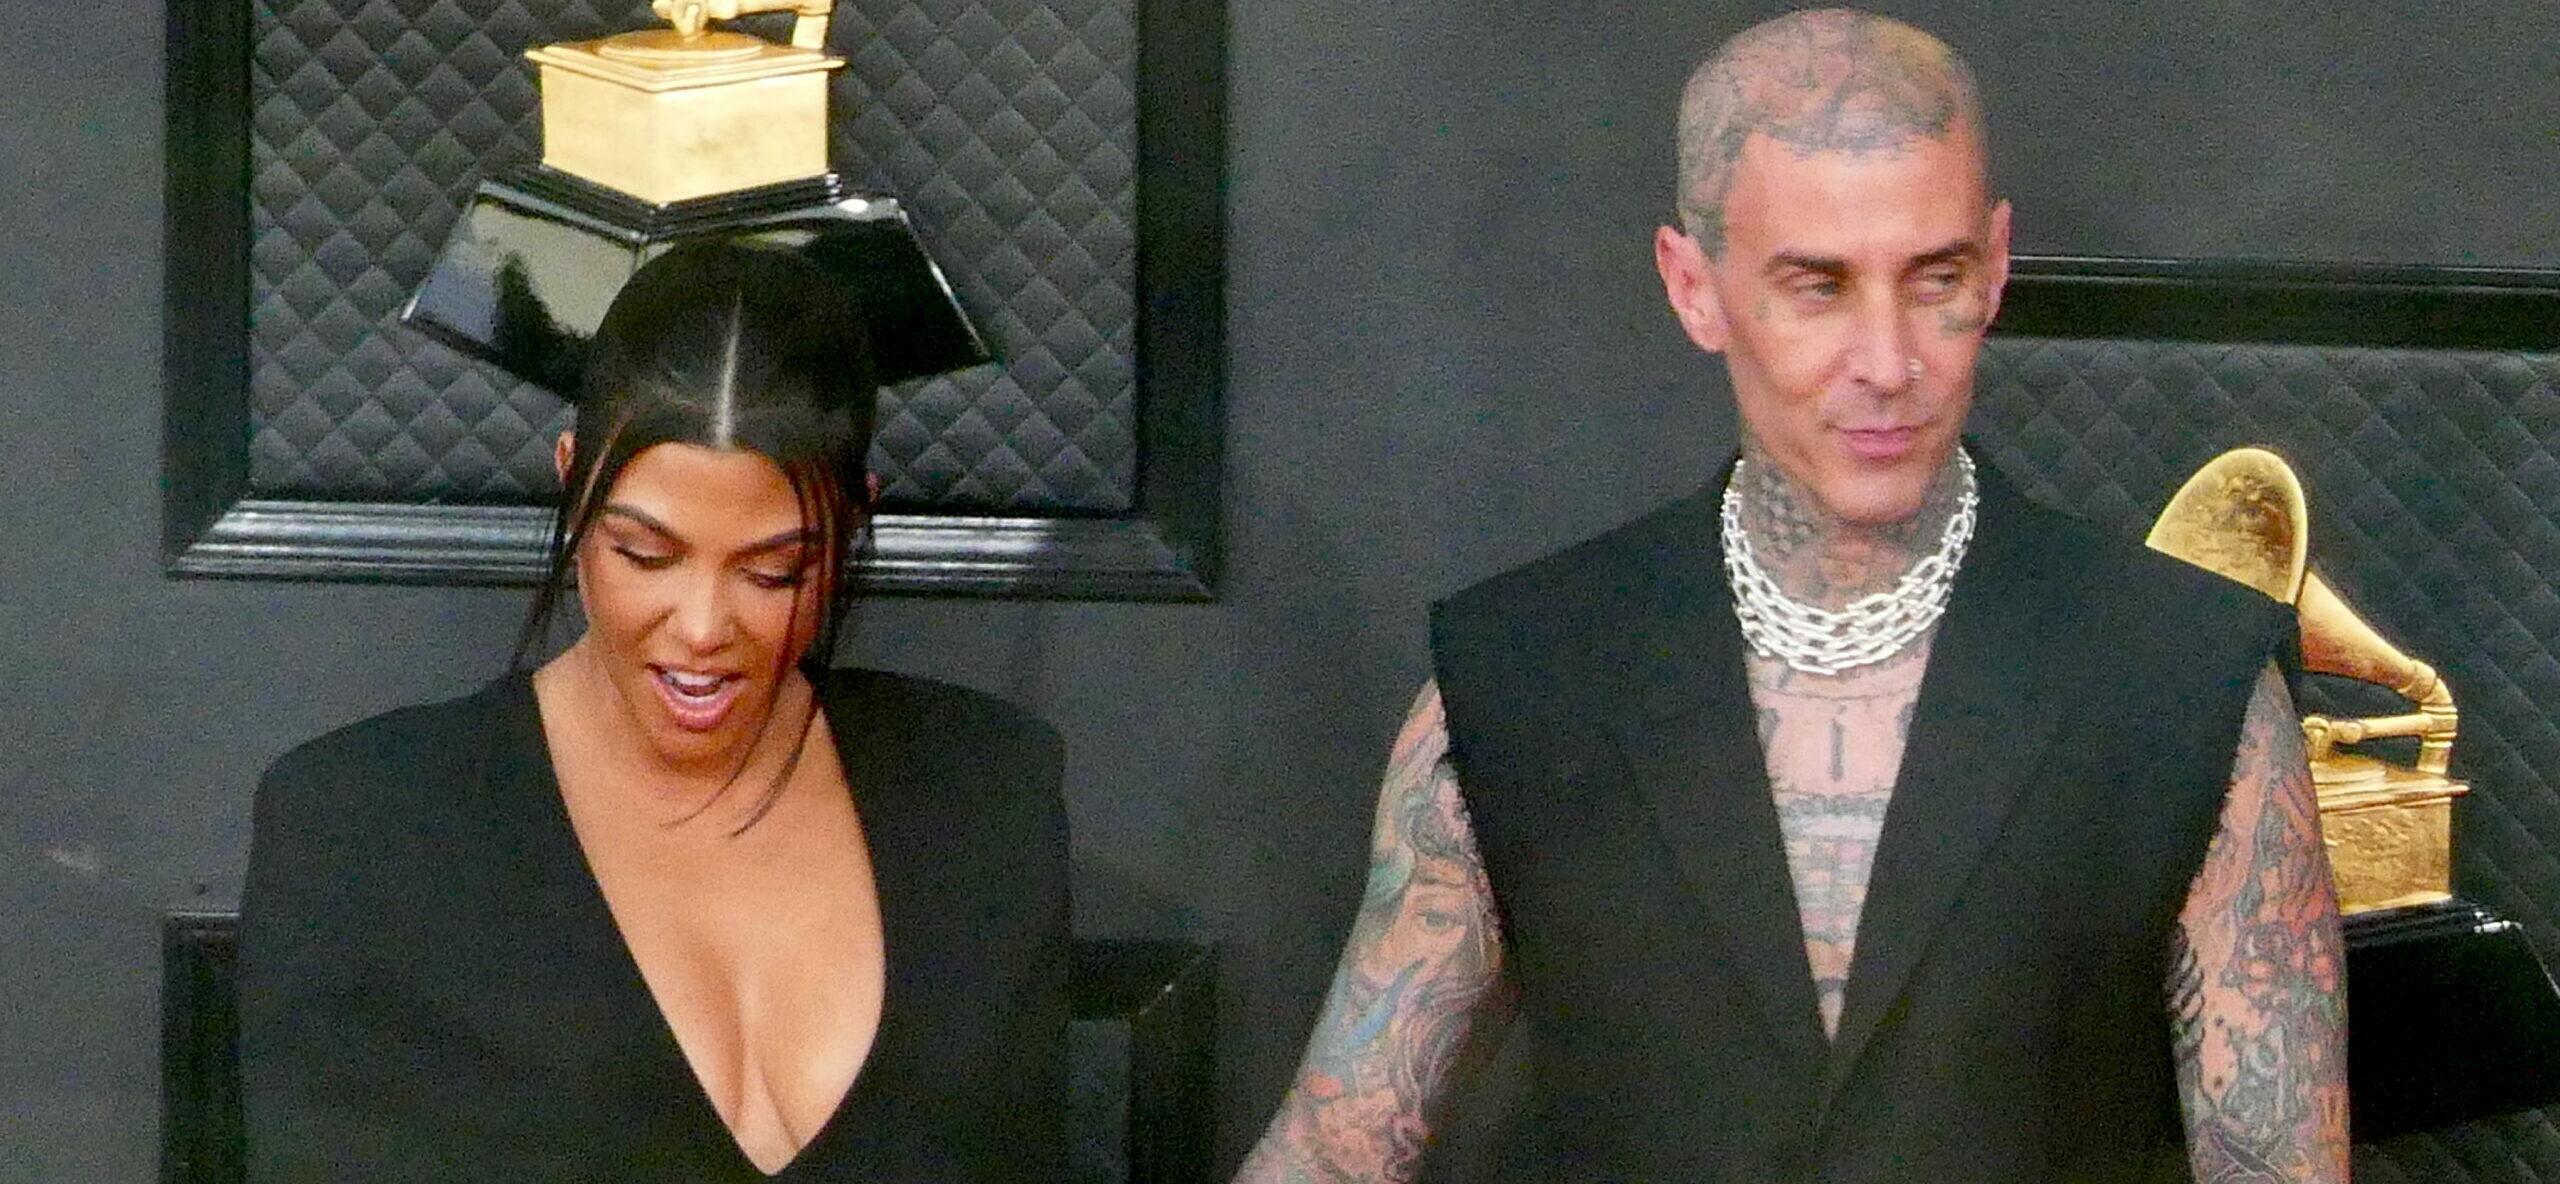 Kourtey Kardashian and Travis Barker kiss and show major pda as they attend first Grammys together in Las Vegas